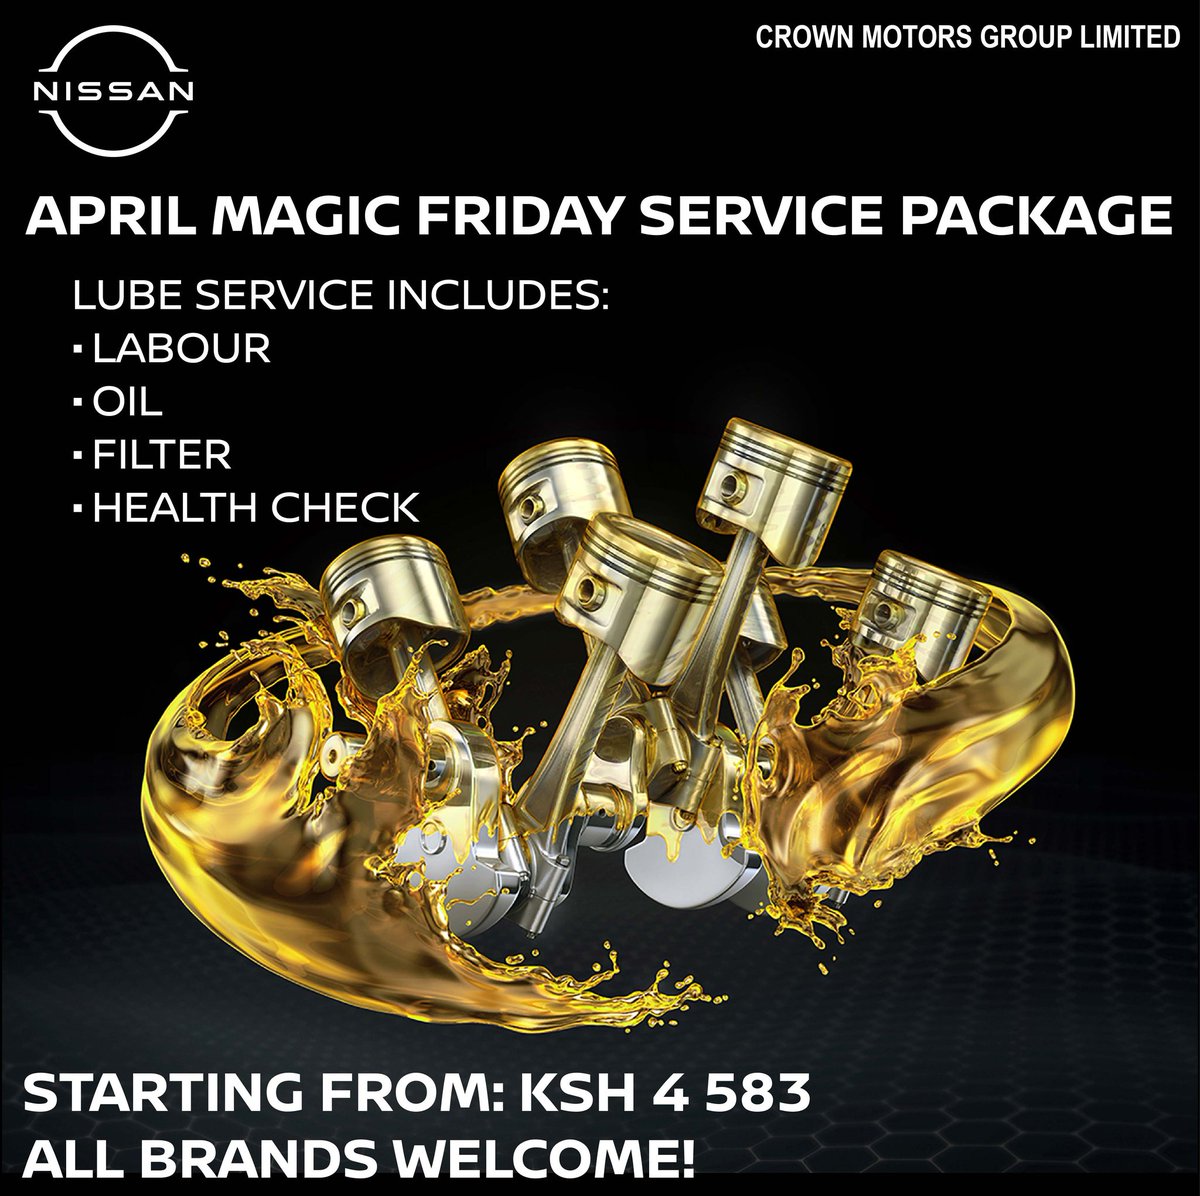 Enhance your driving experience from only KSH 4 583 with our magic service package. Visit Nissan Kenya today or contact us at +254 736 407 533, info@crownmotors.co.ke or crownmotors.co.ke/nissan/ #NissanKenya